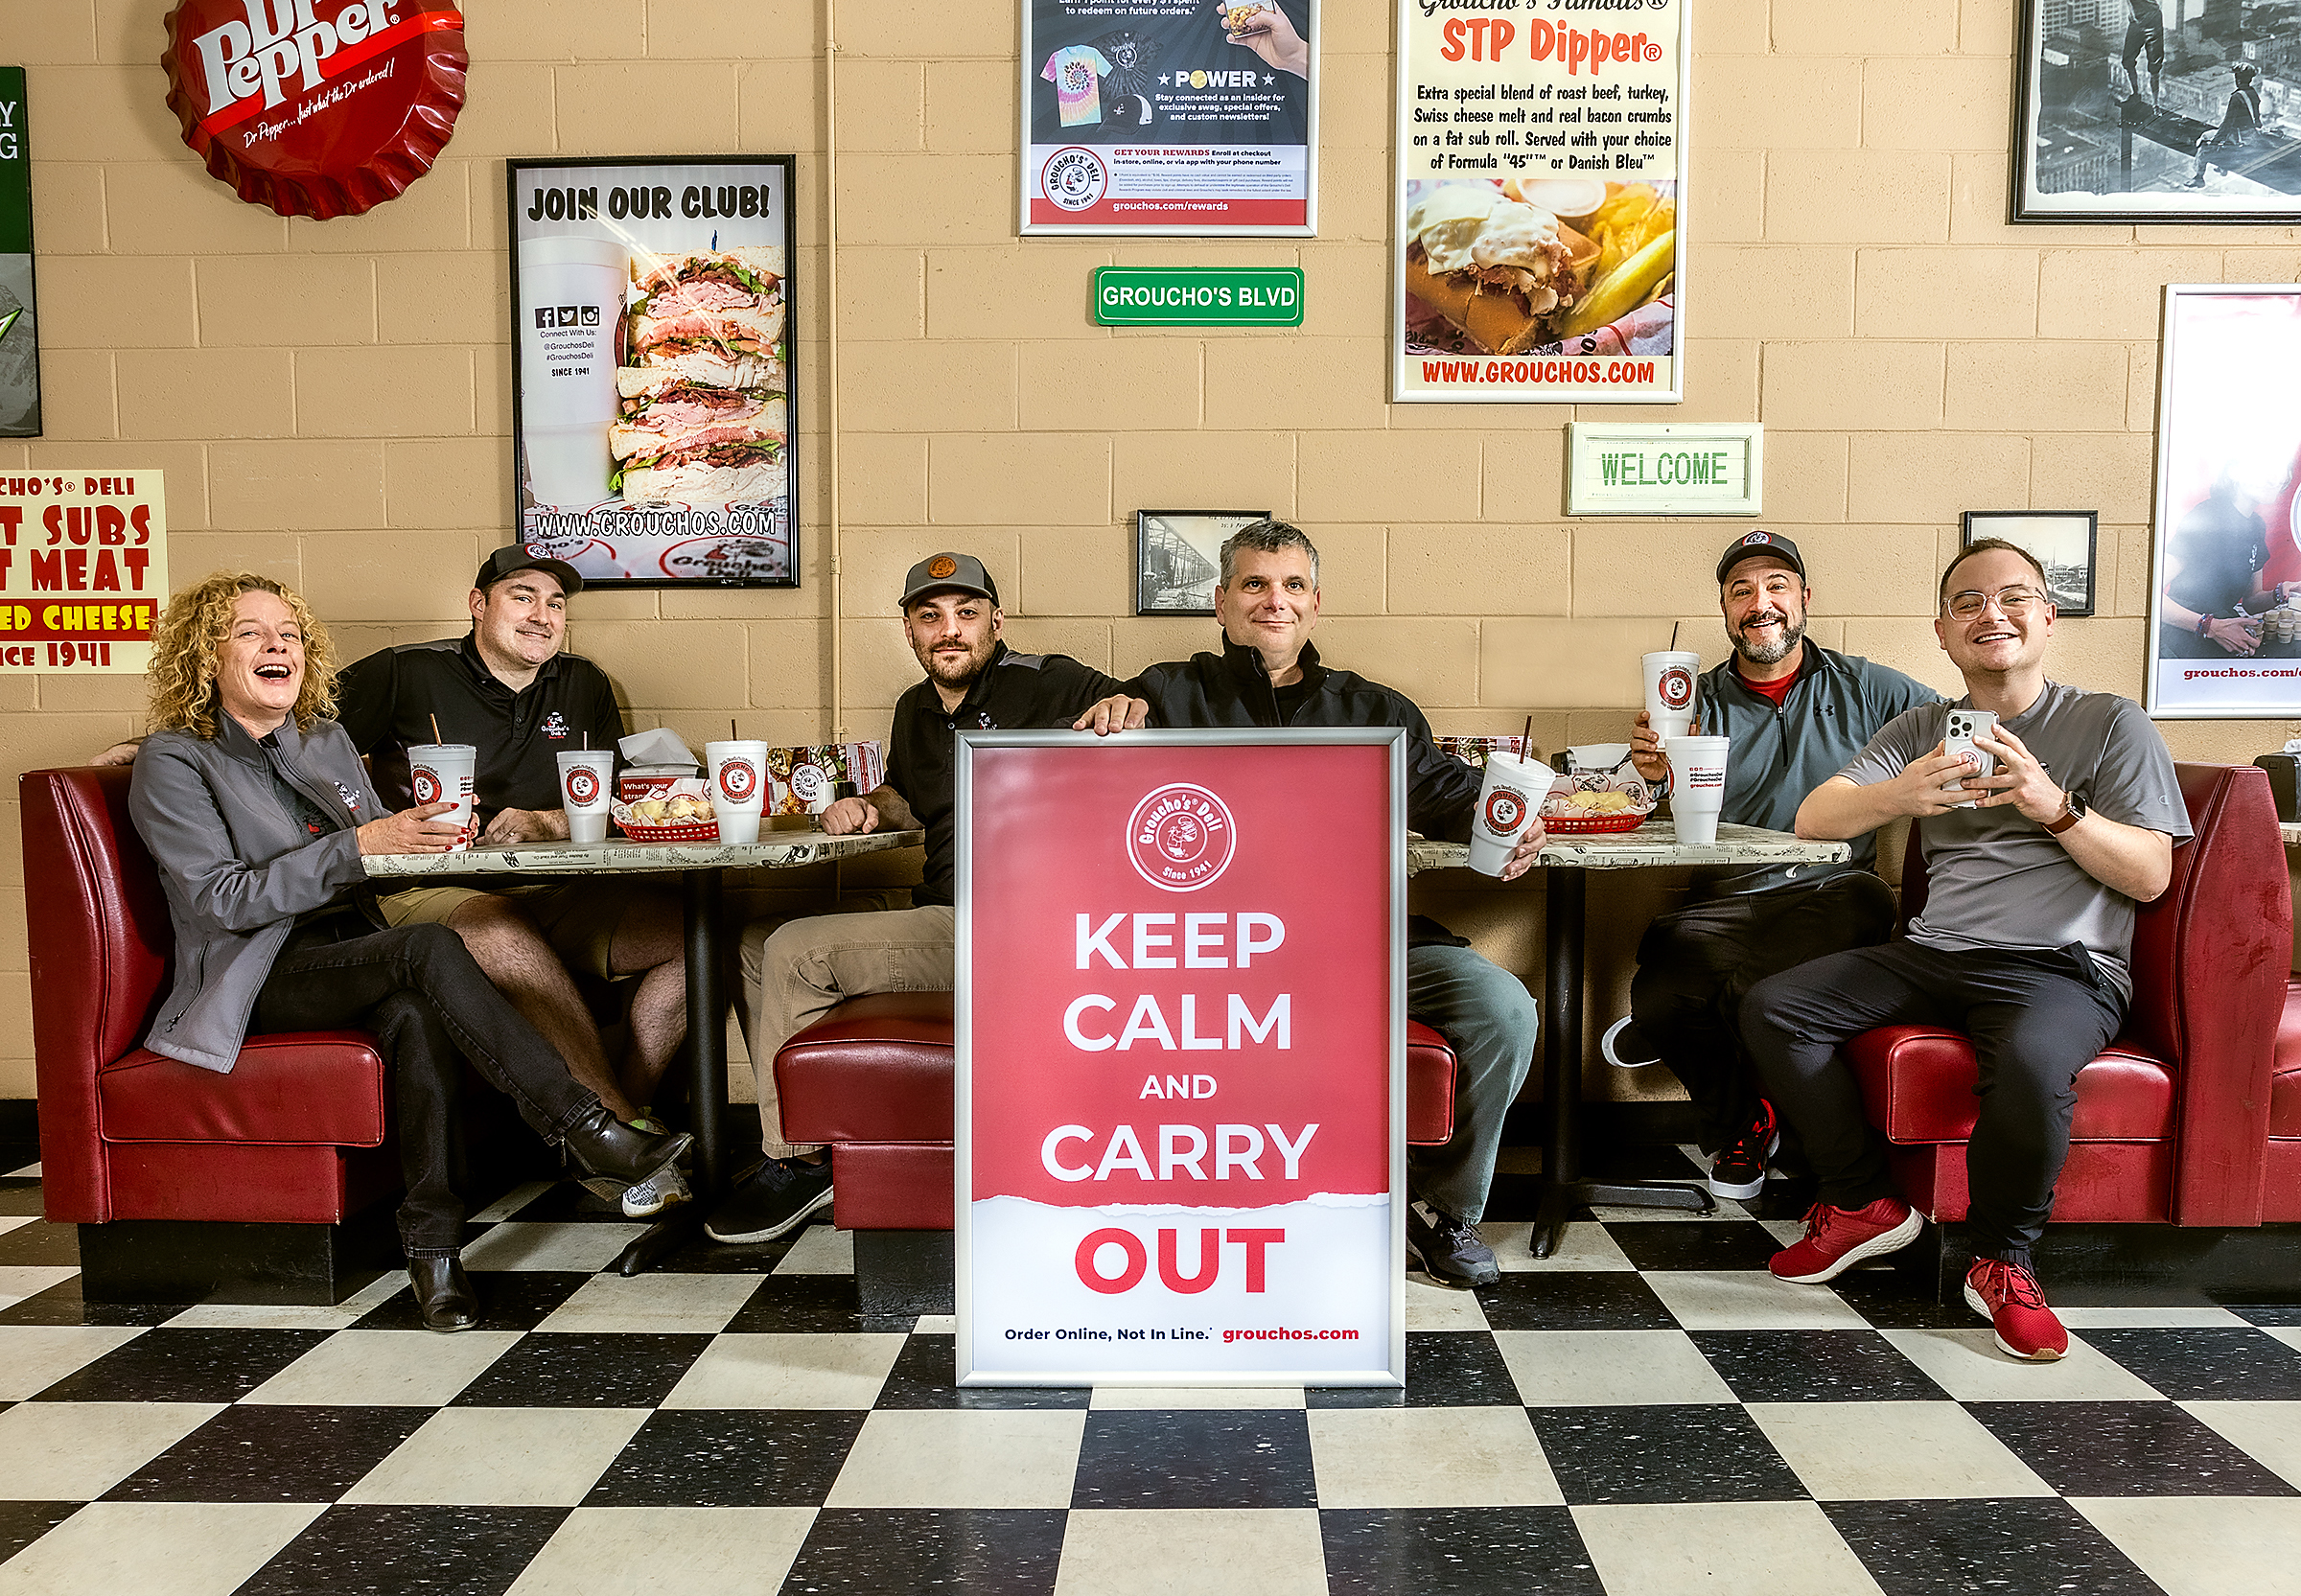 How can you “Keep Calm and Carry Out” when Groucho’s Deli is voted Best Sandwich, Best Iced Tea, AND Best Bang for Your Buck? Sit down and dig in! Adrienne Somers, Cullen Padgett, Alex Buchanan, Bruce Miller, Deric Rosenbaum, and Forrest Nettles.